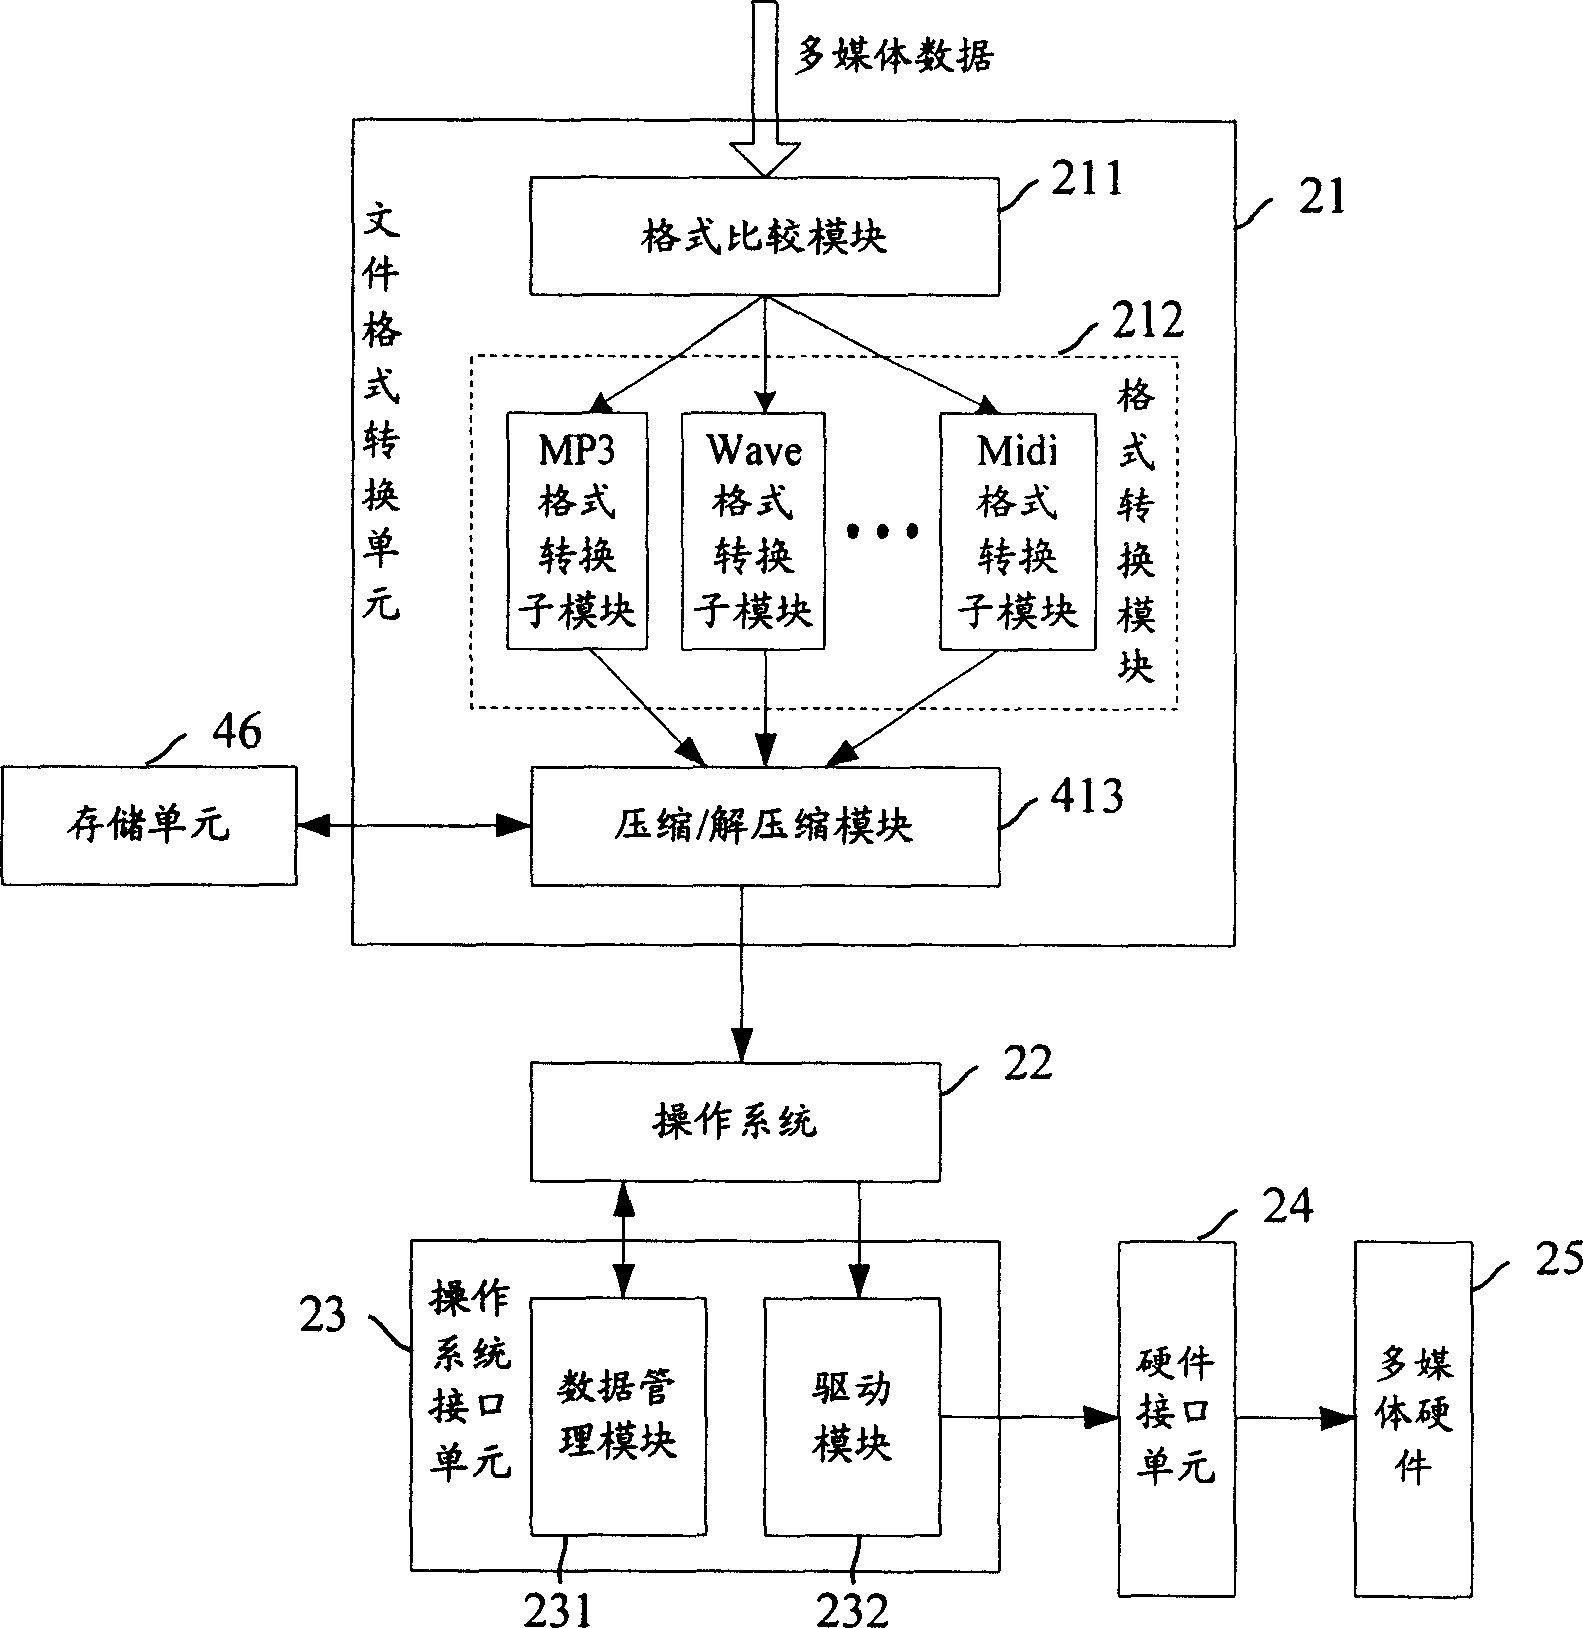 Co-phase multimedia integrated playing system and method